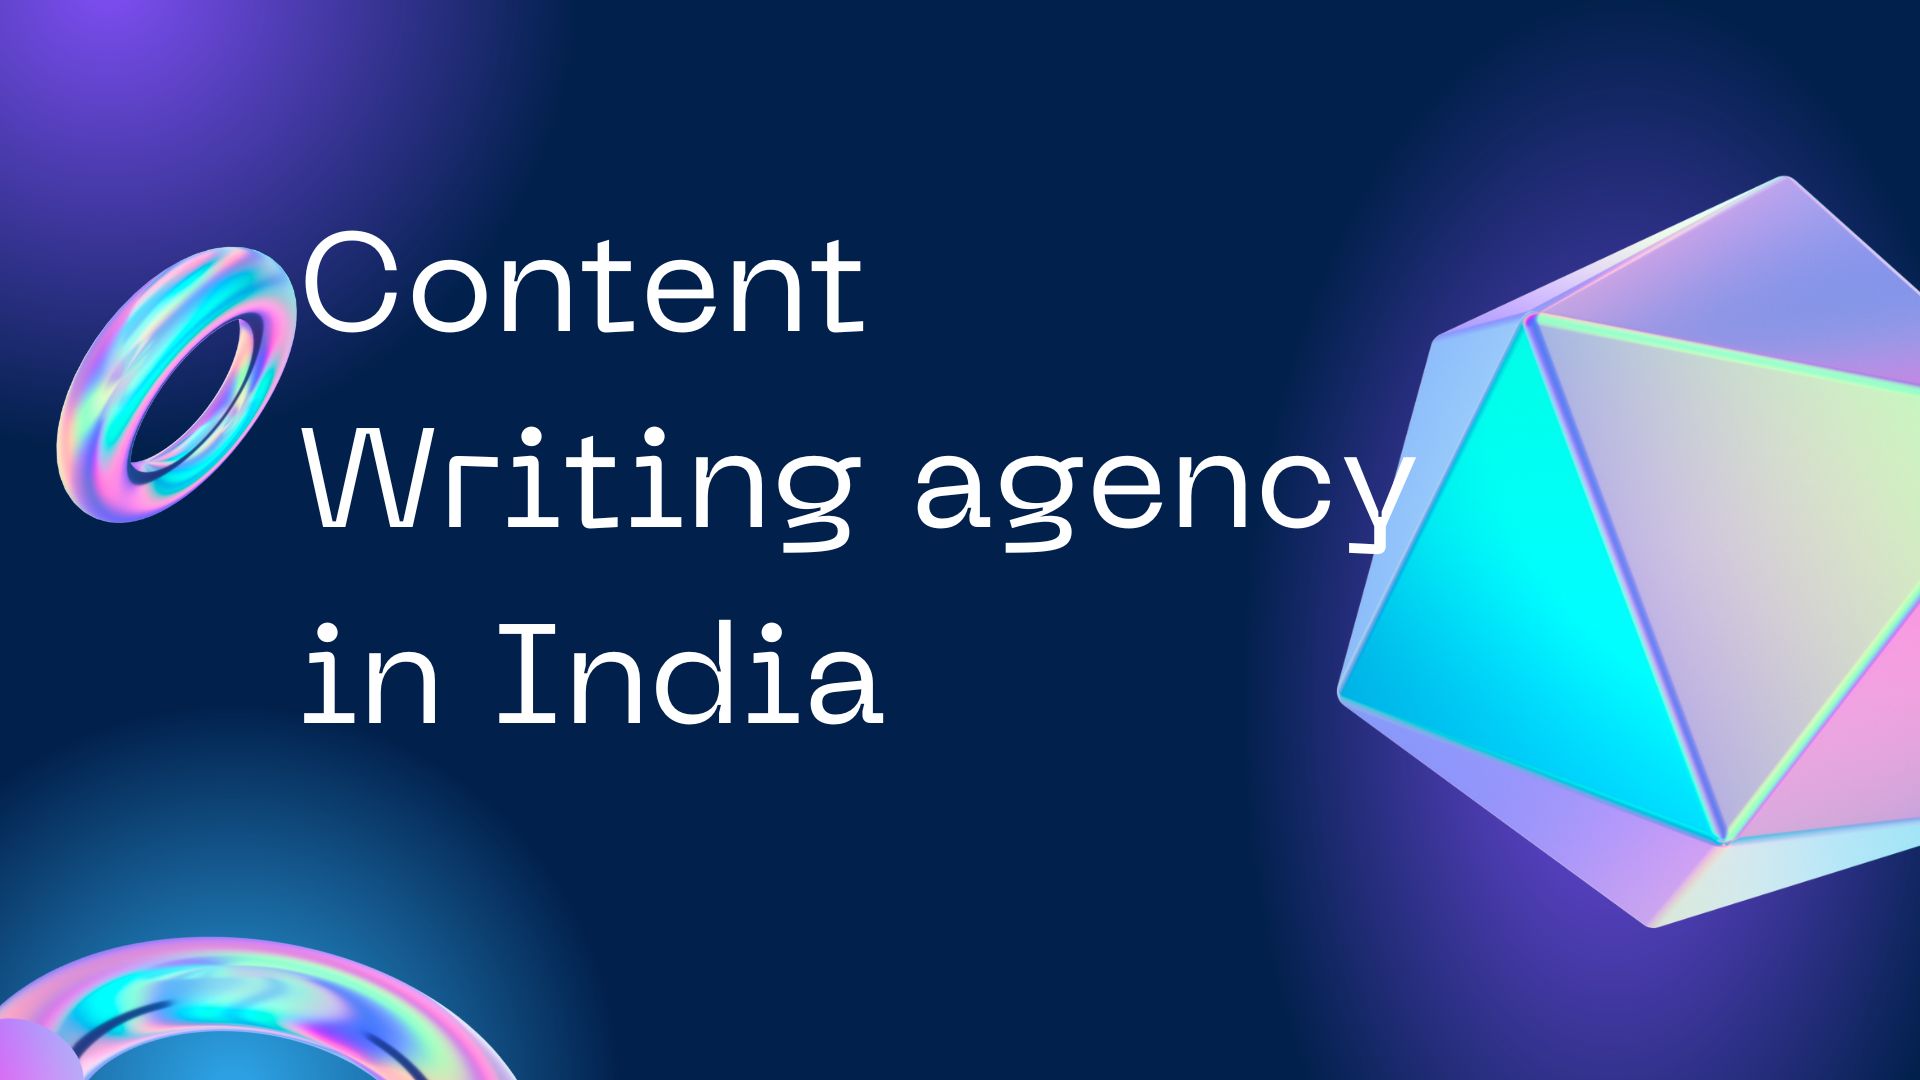 Content Writing Agency in India | Premium writing services